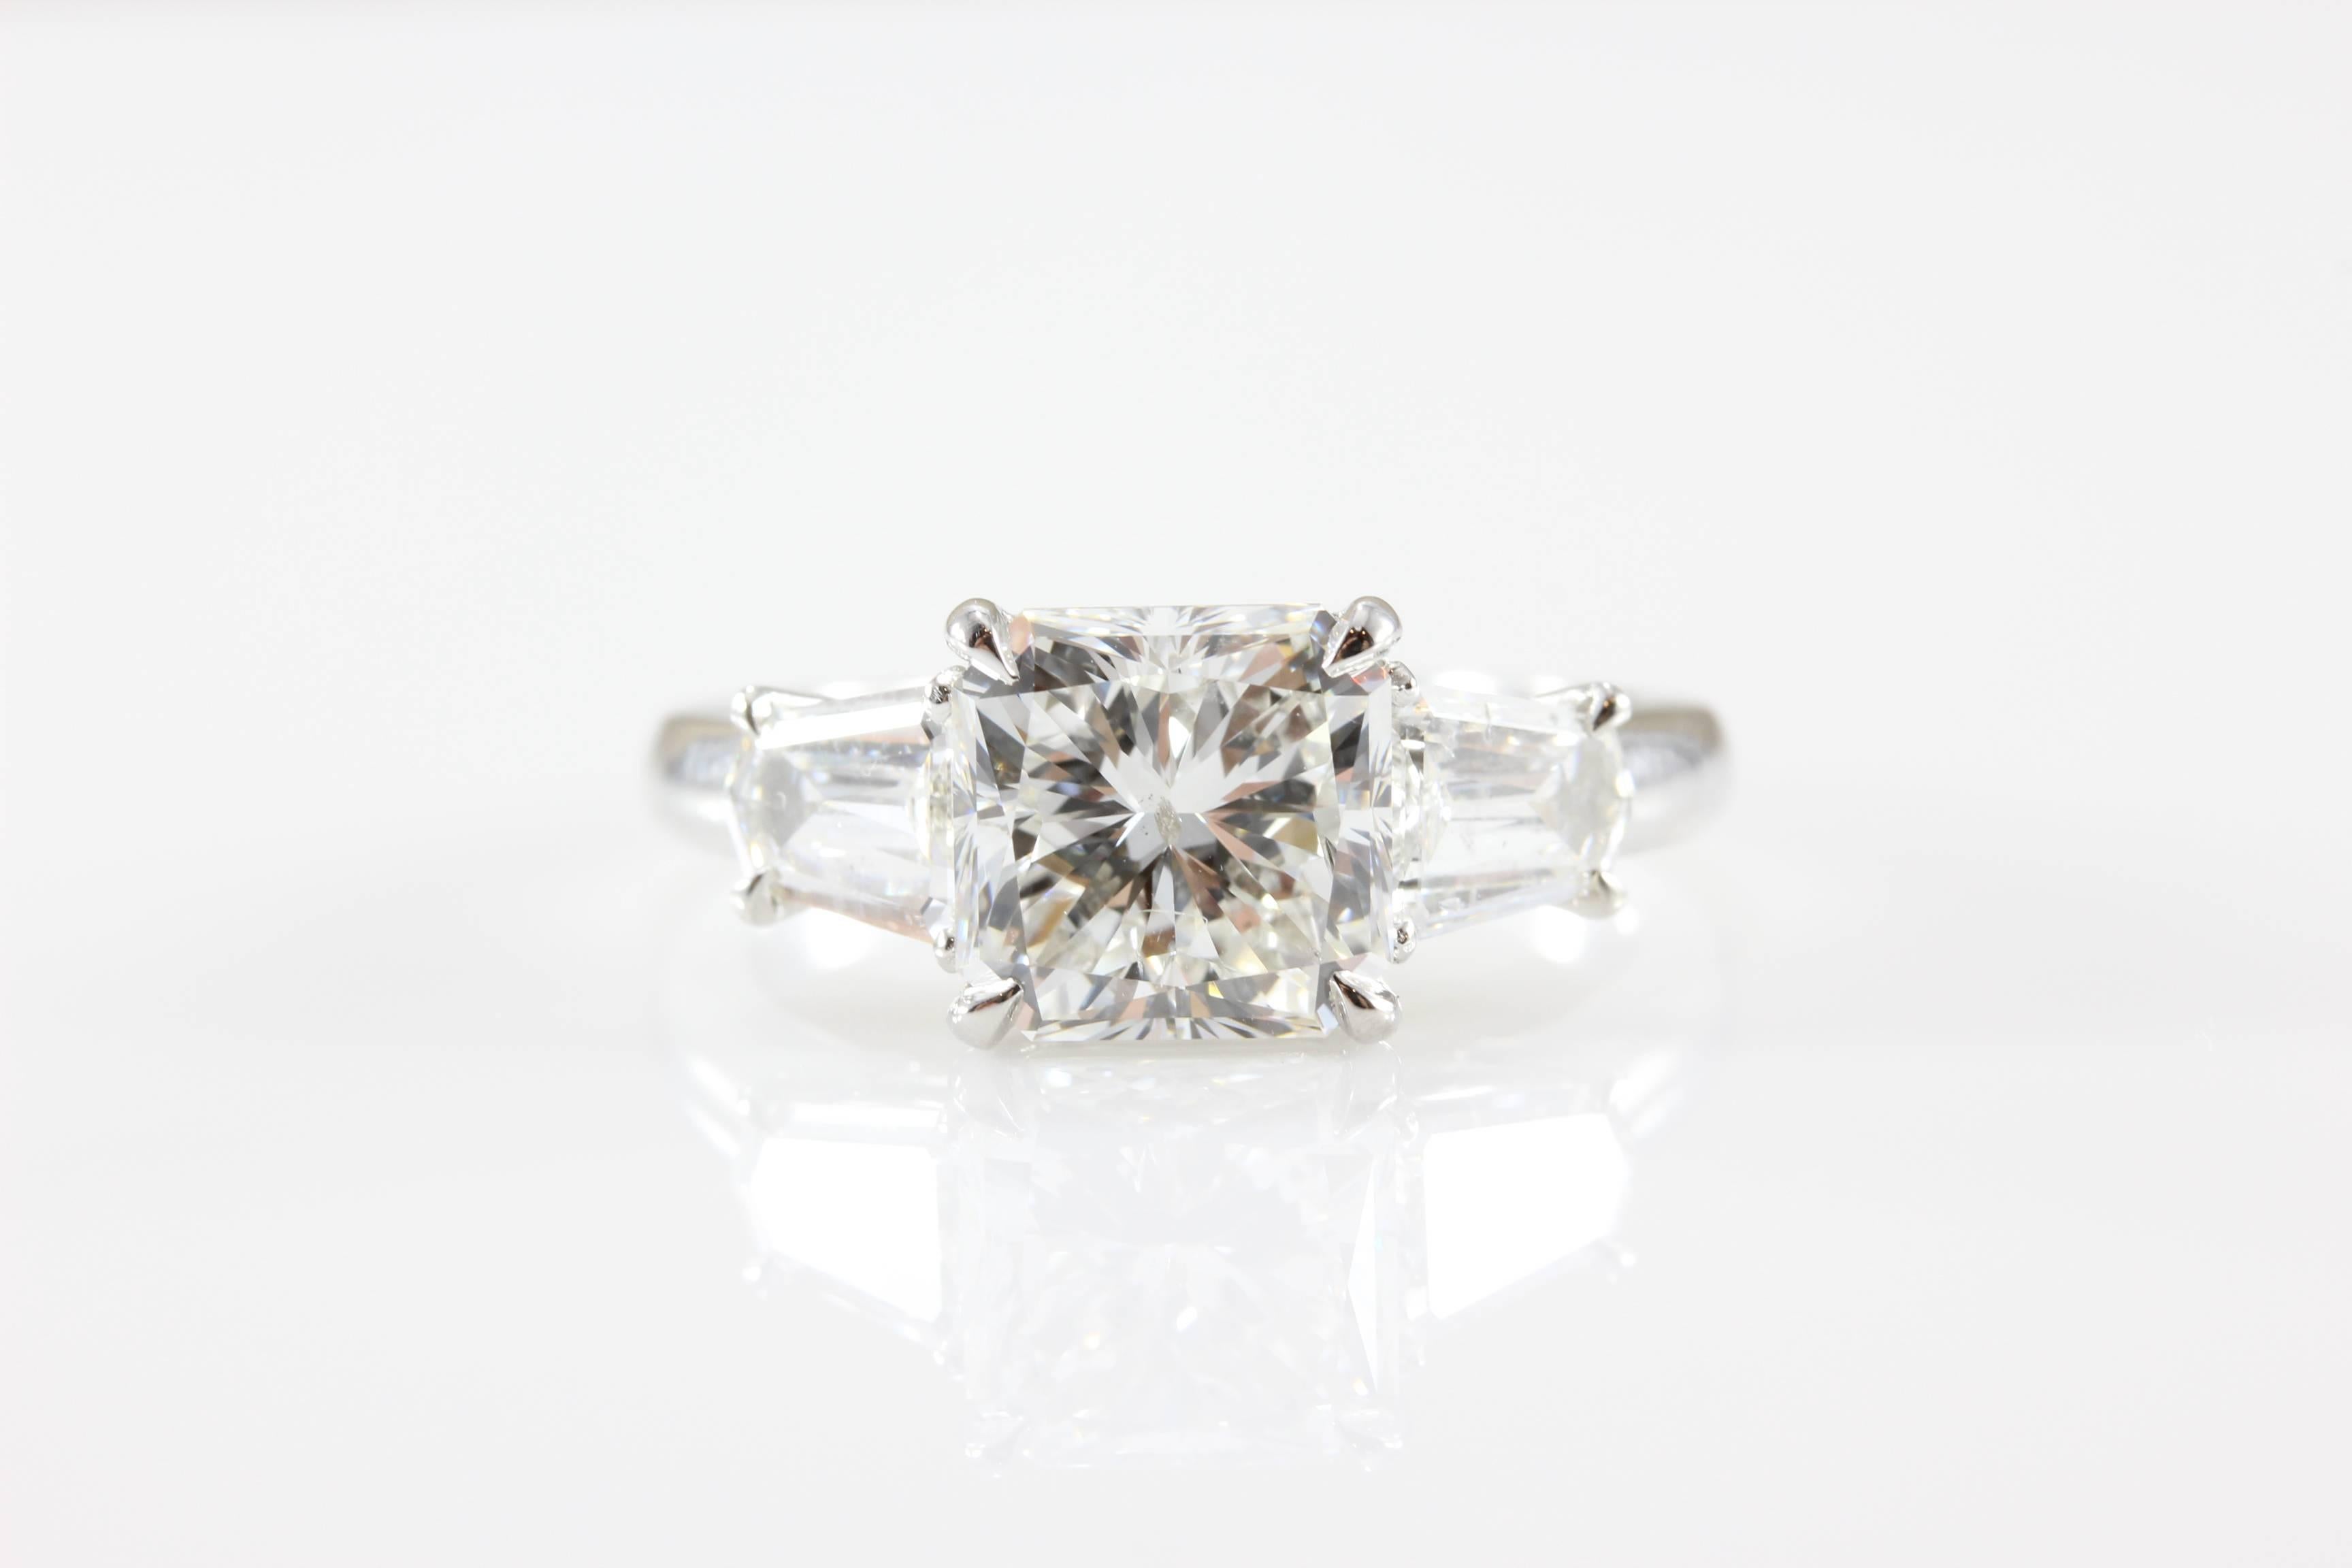 A spectacular 3.22 carat radiant cut diamond is modernly set with two cadillac style side diamonds (1.80 carats).  This radiant cut diamond is even more unique with its cut corners.  This ring is feminine and classy in design and is set in platinum